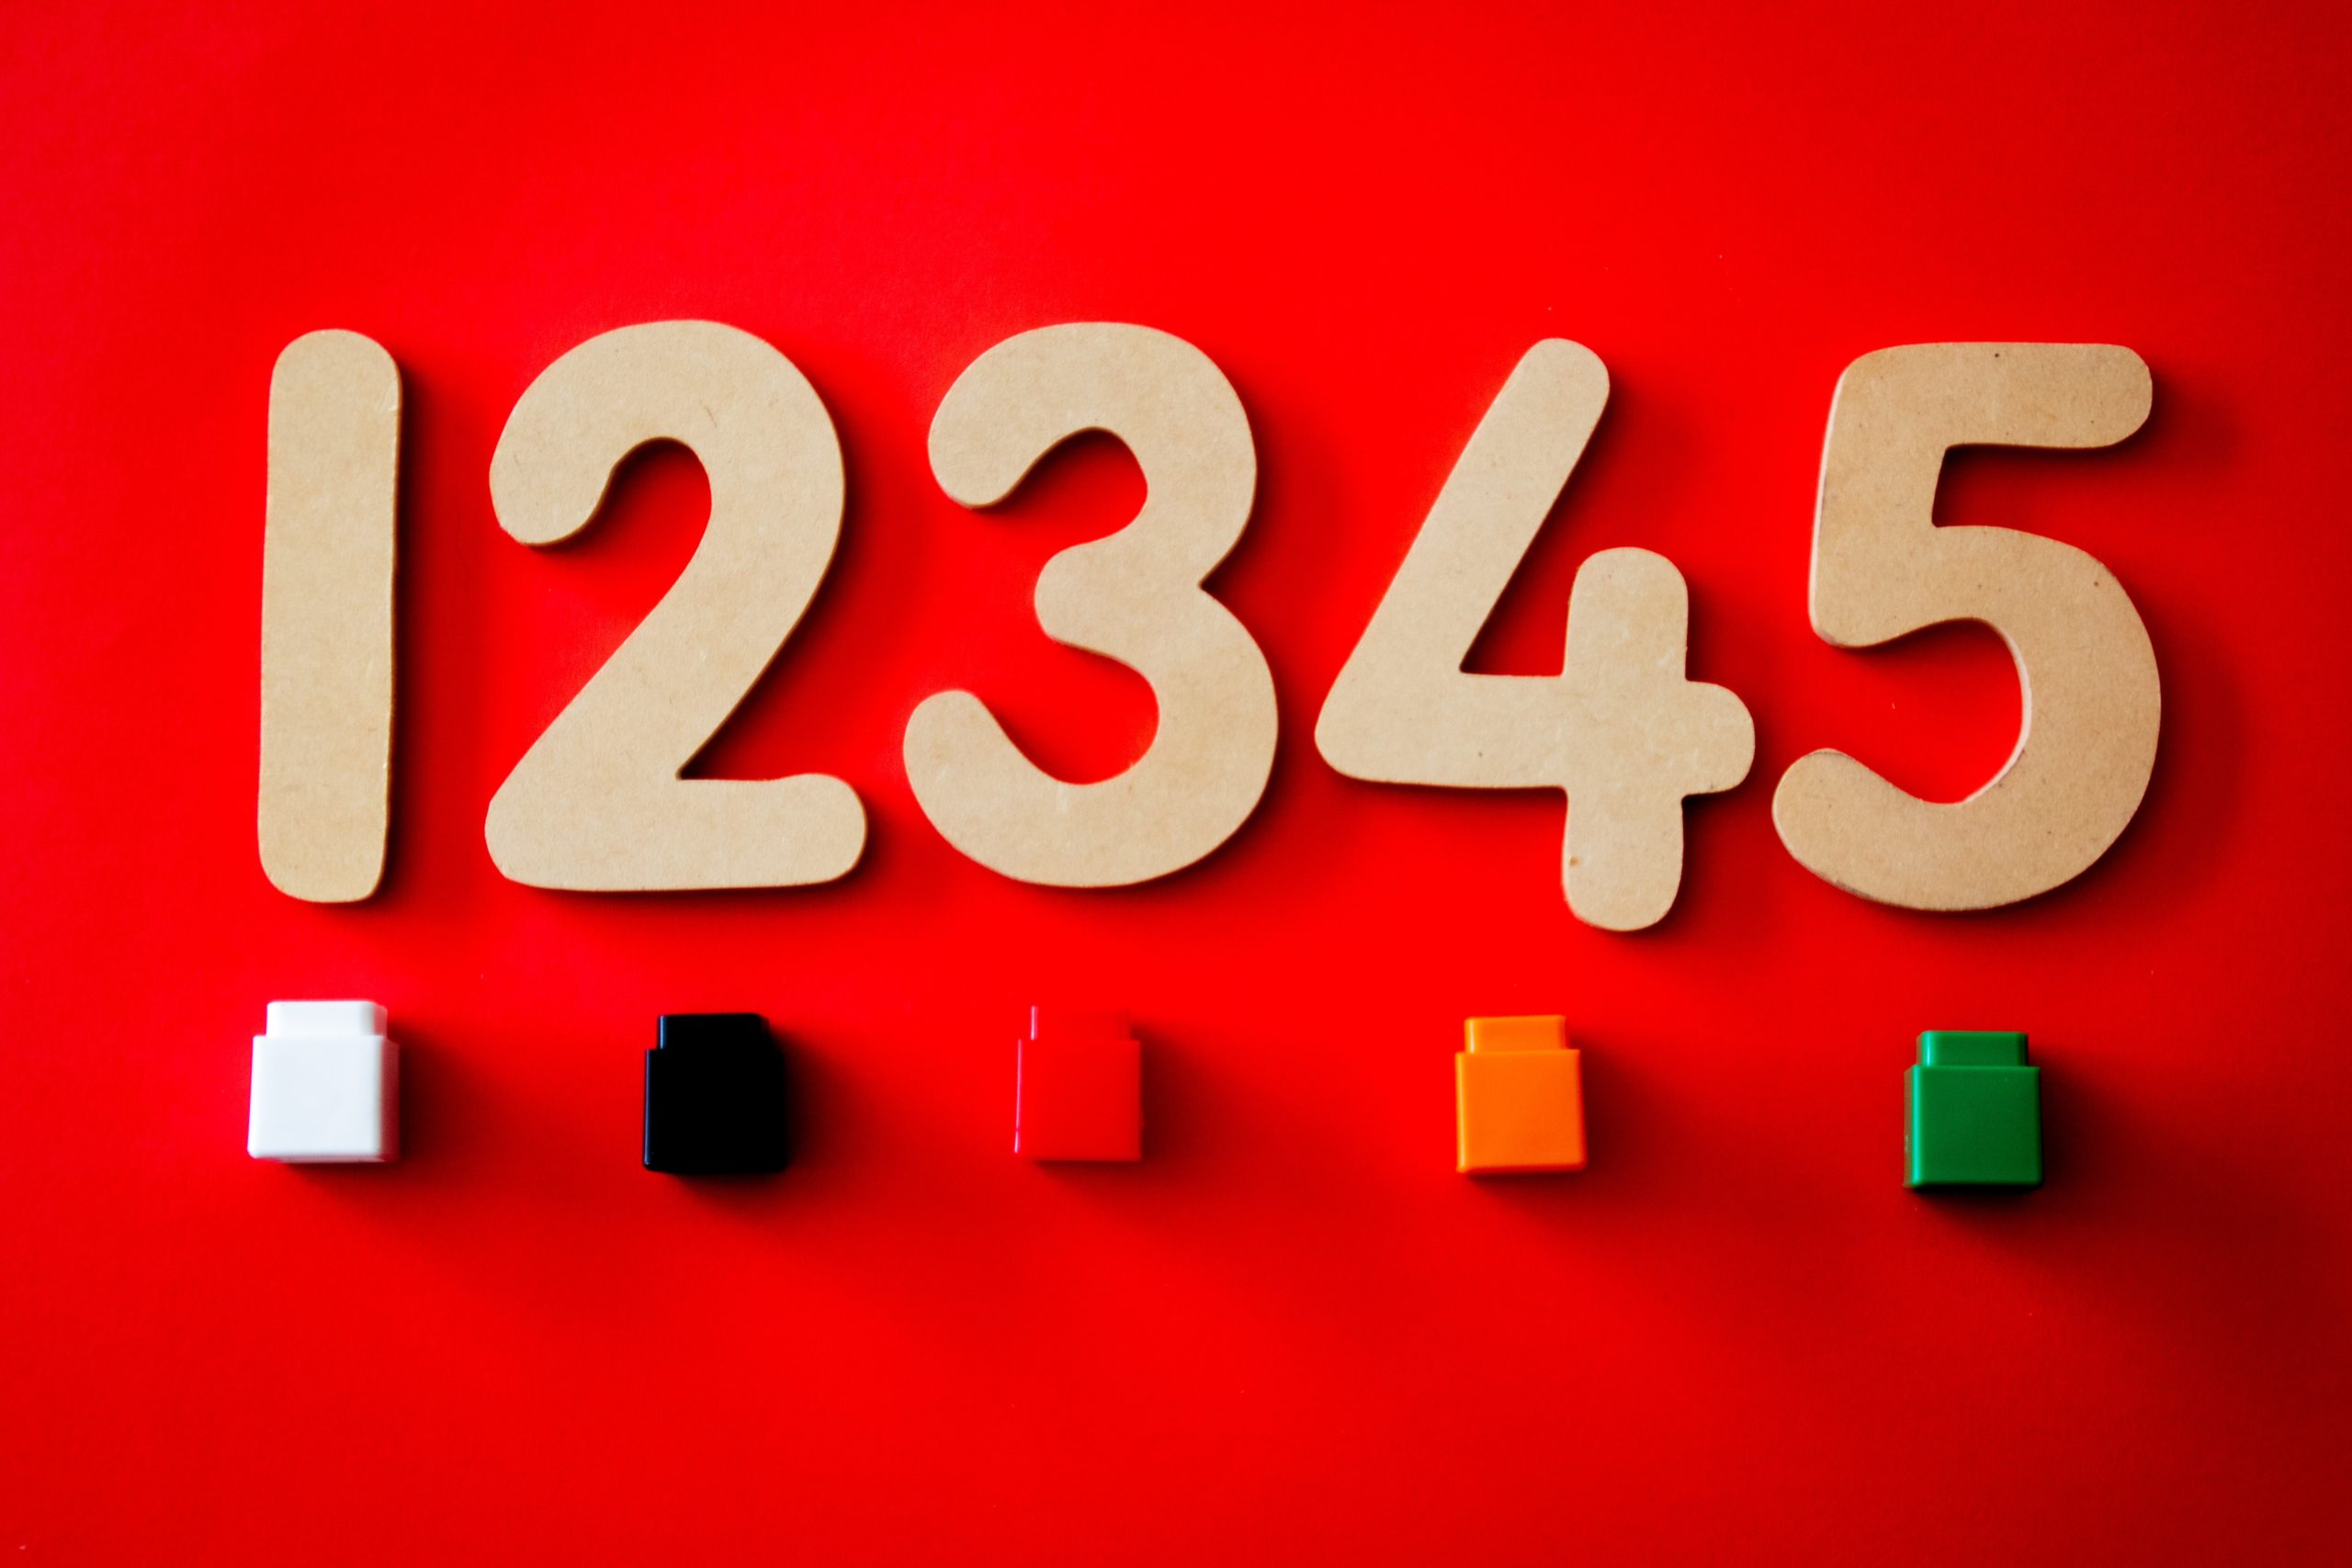 Some wooden numbers and coloured plastic blocks are lying on a red surface.